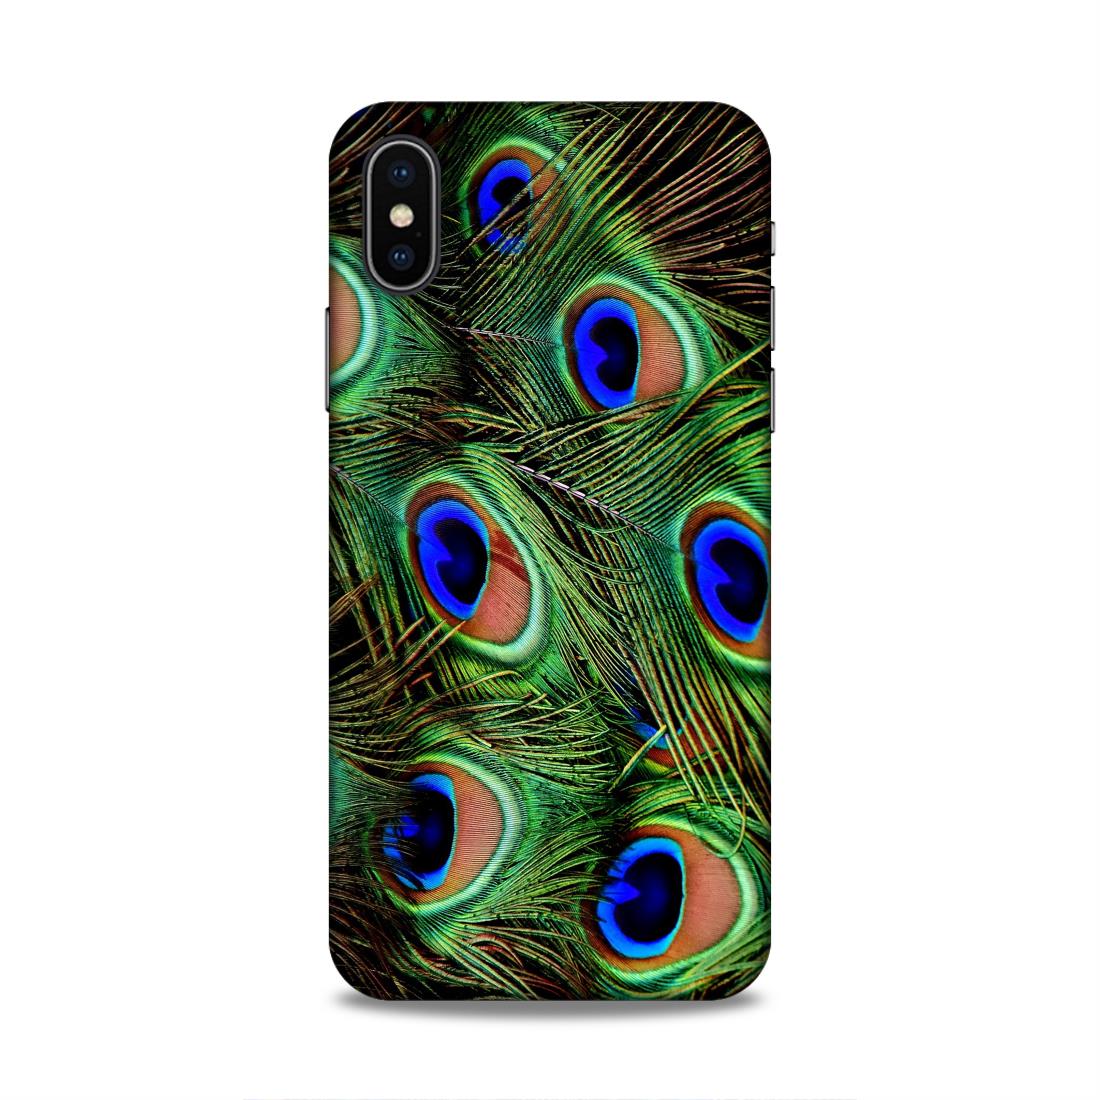 Peacock Feather Hard Back Case For Apple iPhone X/XS